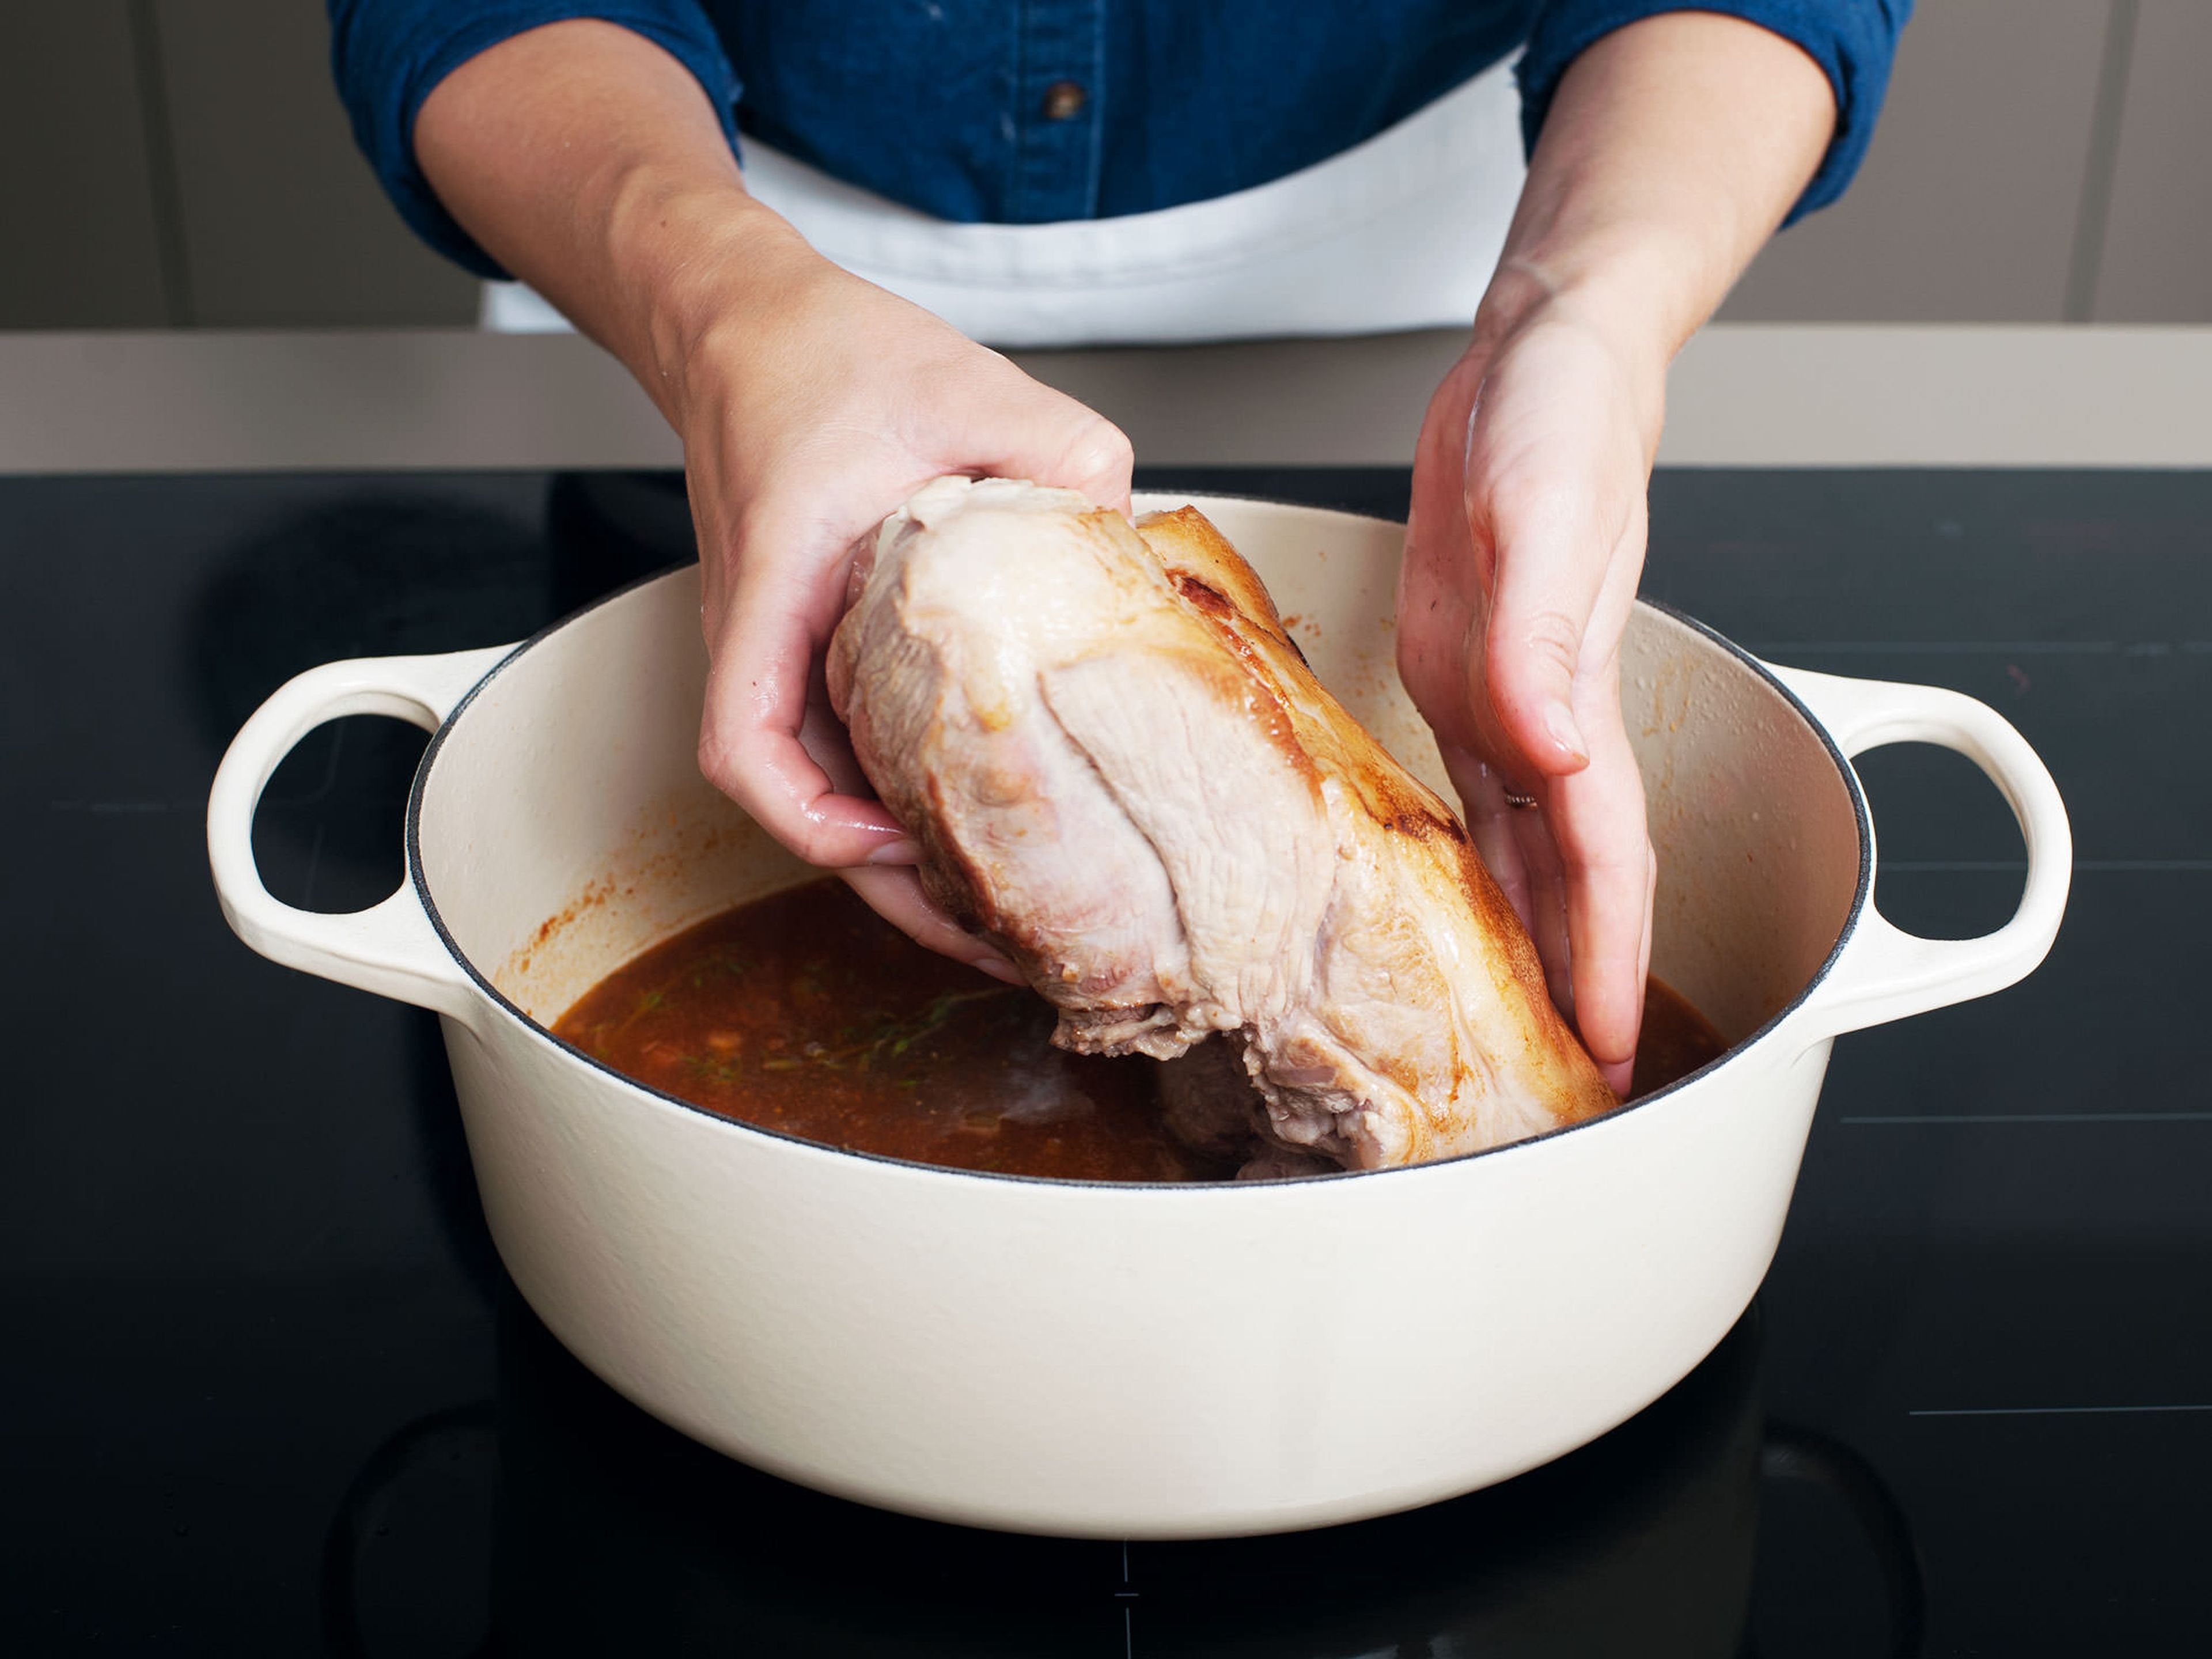 Return pork to pot, cover, and transfer to oven. Cook for approx. 3 hrs. at 150°C/300°F, then uncover pot and continue to cook for approx. 1 hr., or until the meat is fork tender. Transfer pork to cutting board and tent with aluminum foil to keep warm.